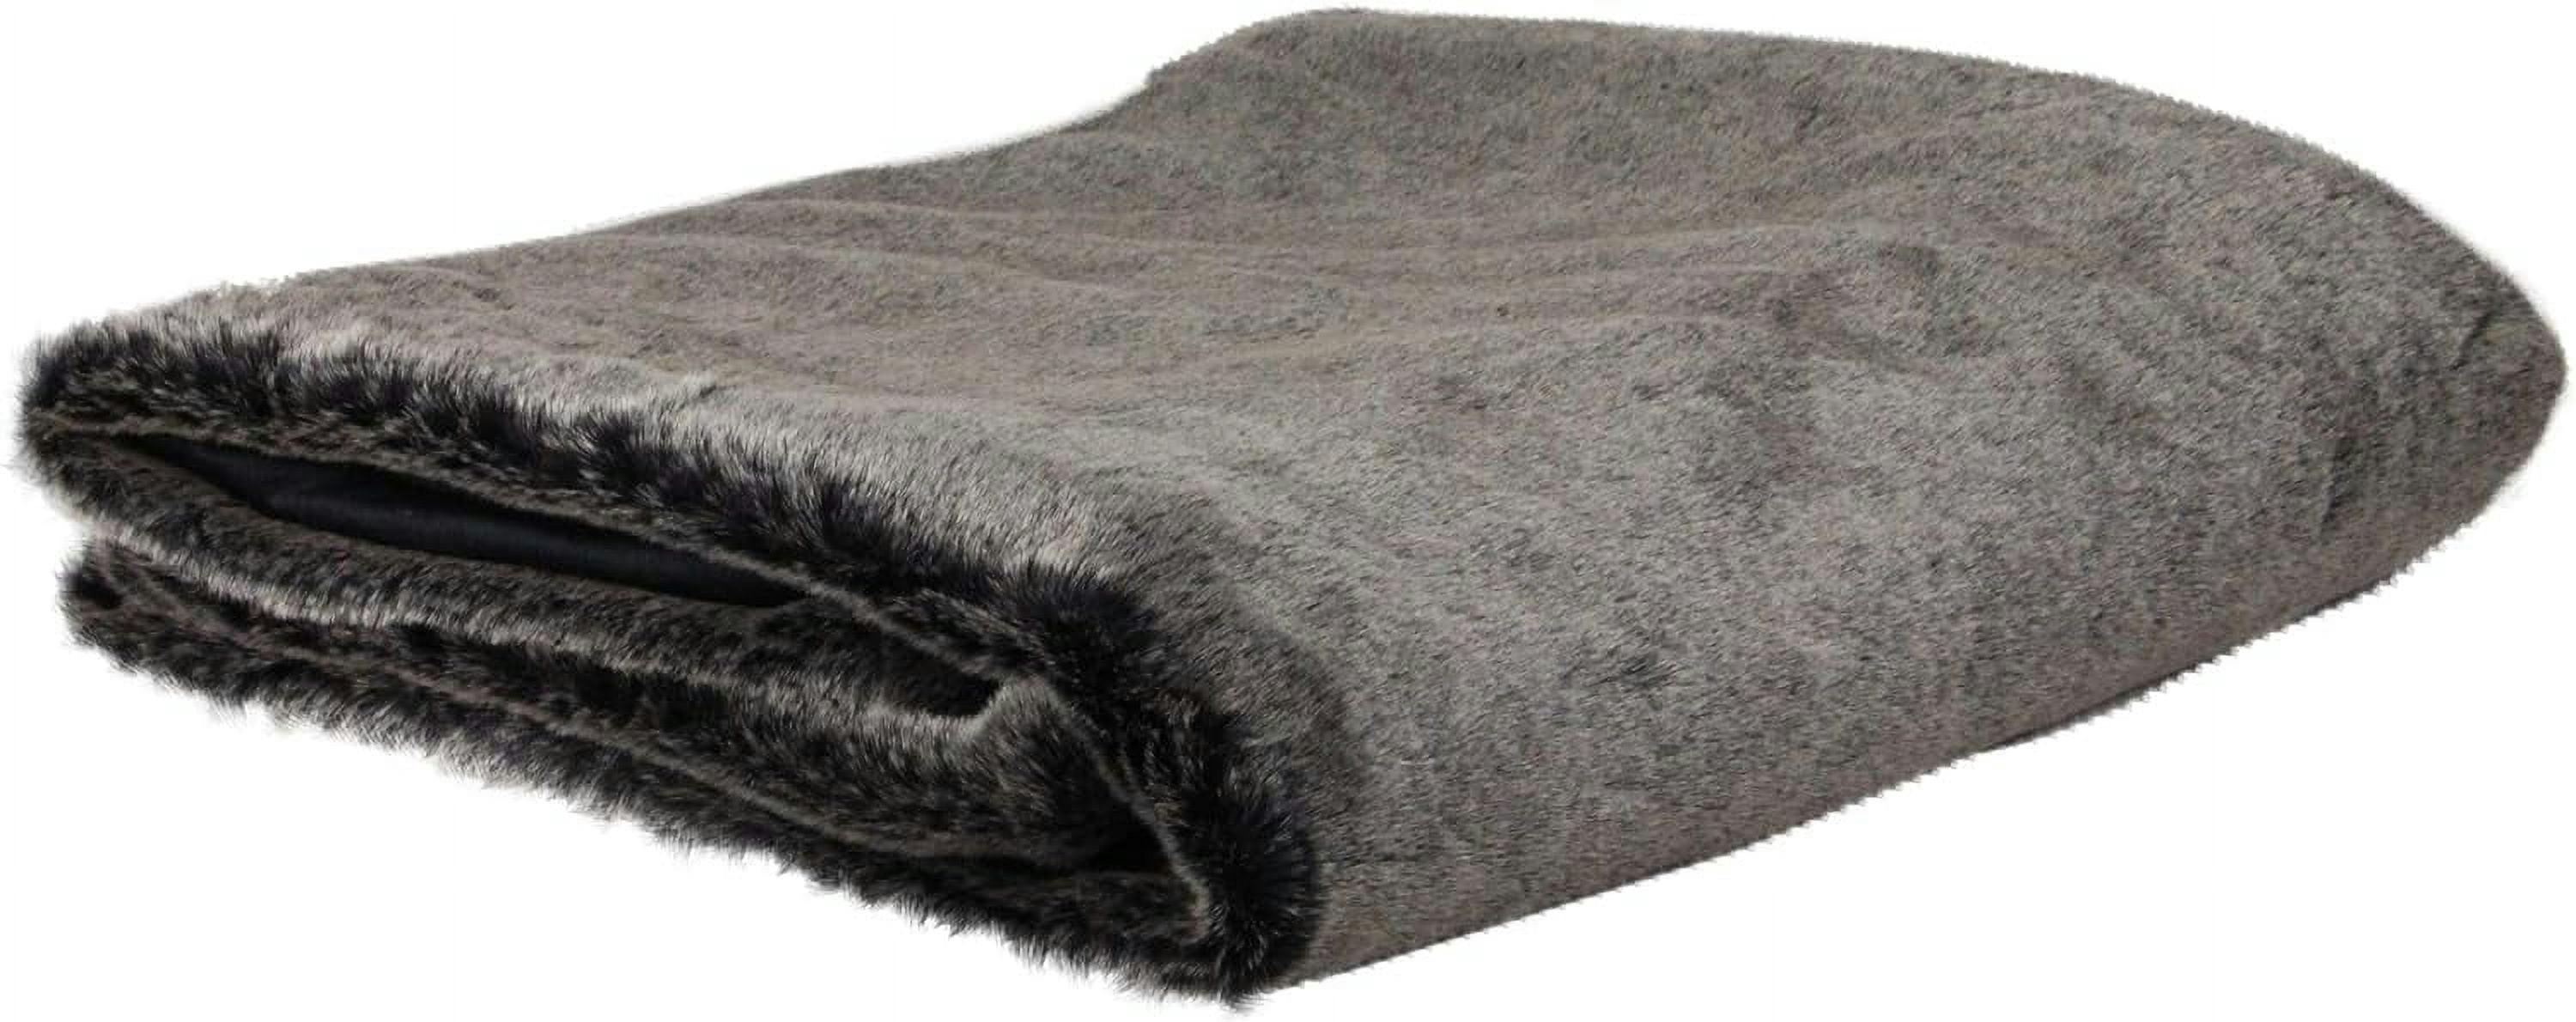 Charcoal Gray Luxurious Faux Fur 50" x 60" Throw Blanket